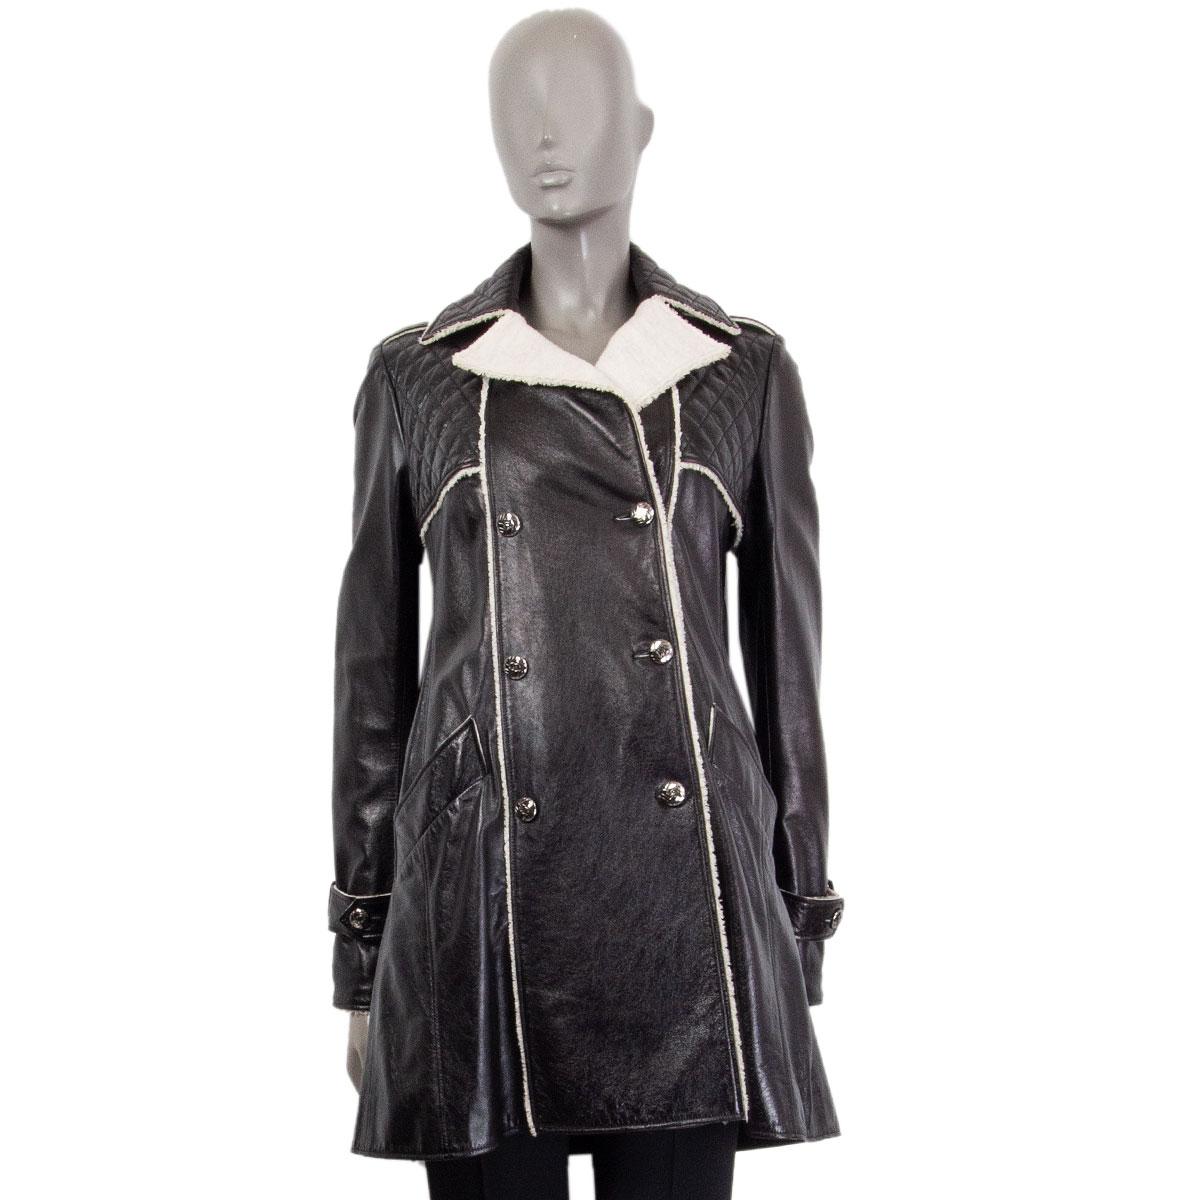 100% authentic Chanel double breasted coat from Metiers d'Art 2011 in black lambskin (100%). With a detailed fringed hemline, stitched notch collar, slight A-line and cuffs straps. Lined in black silk (100%) and wool (100%). Closes in the front with